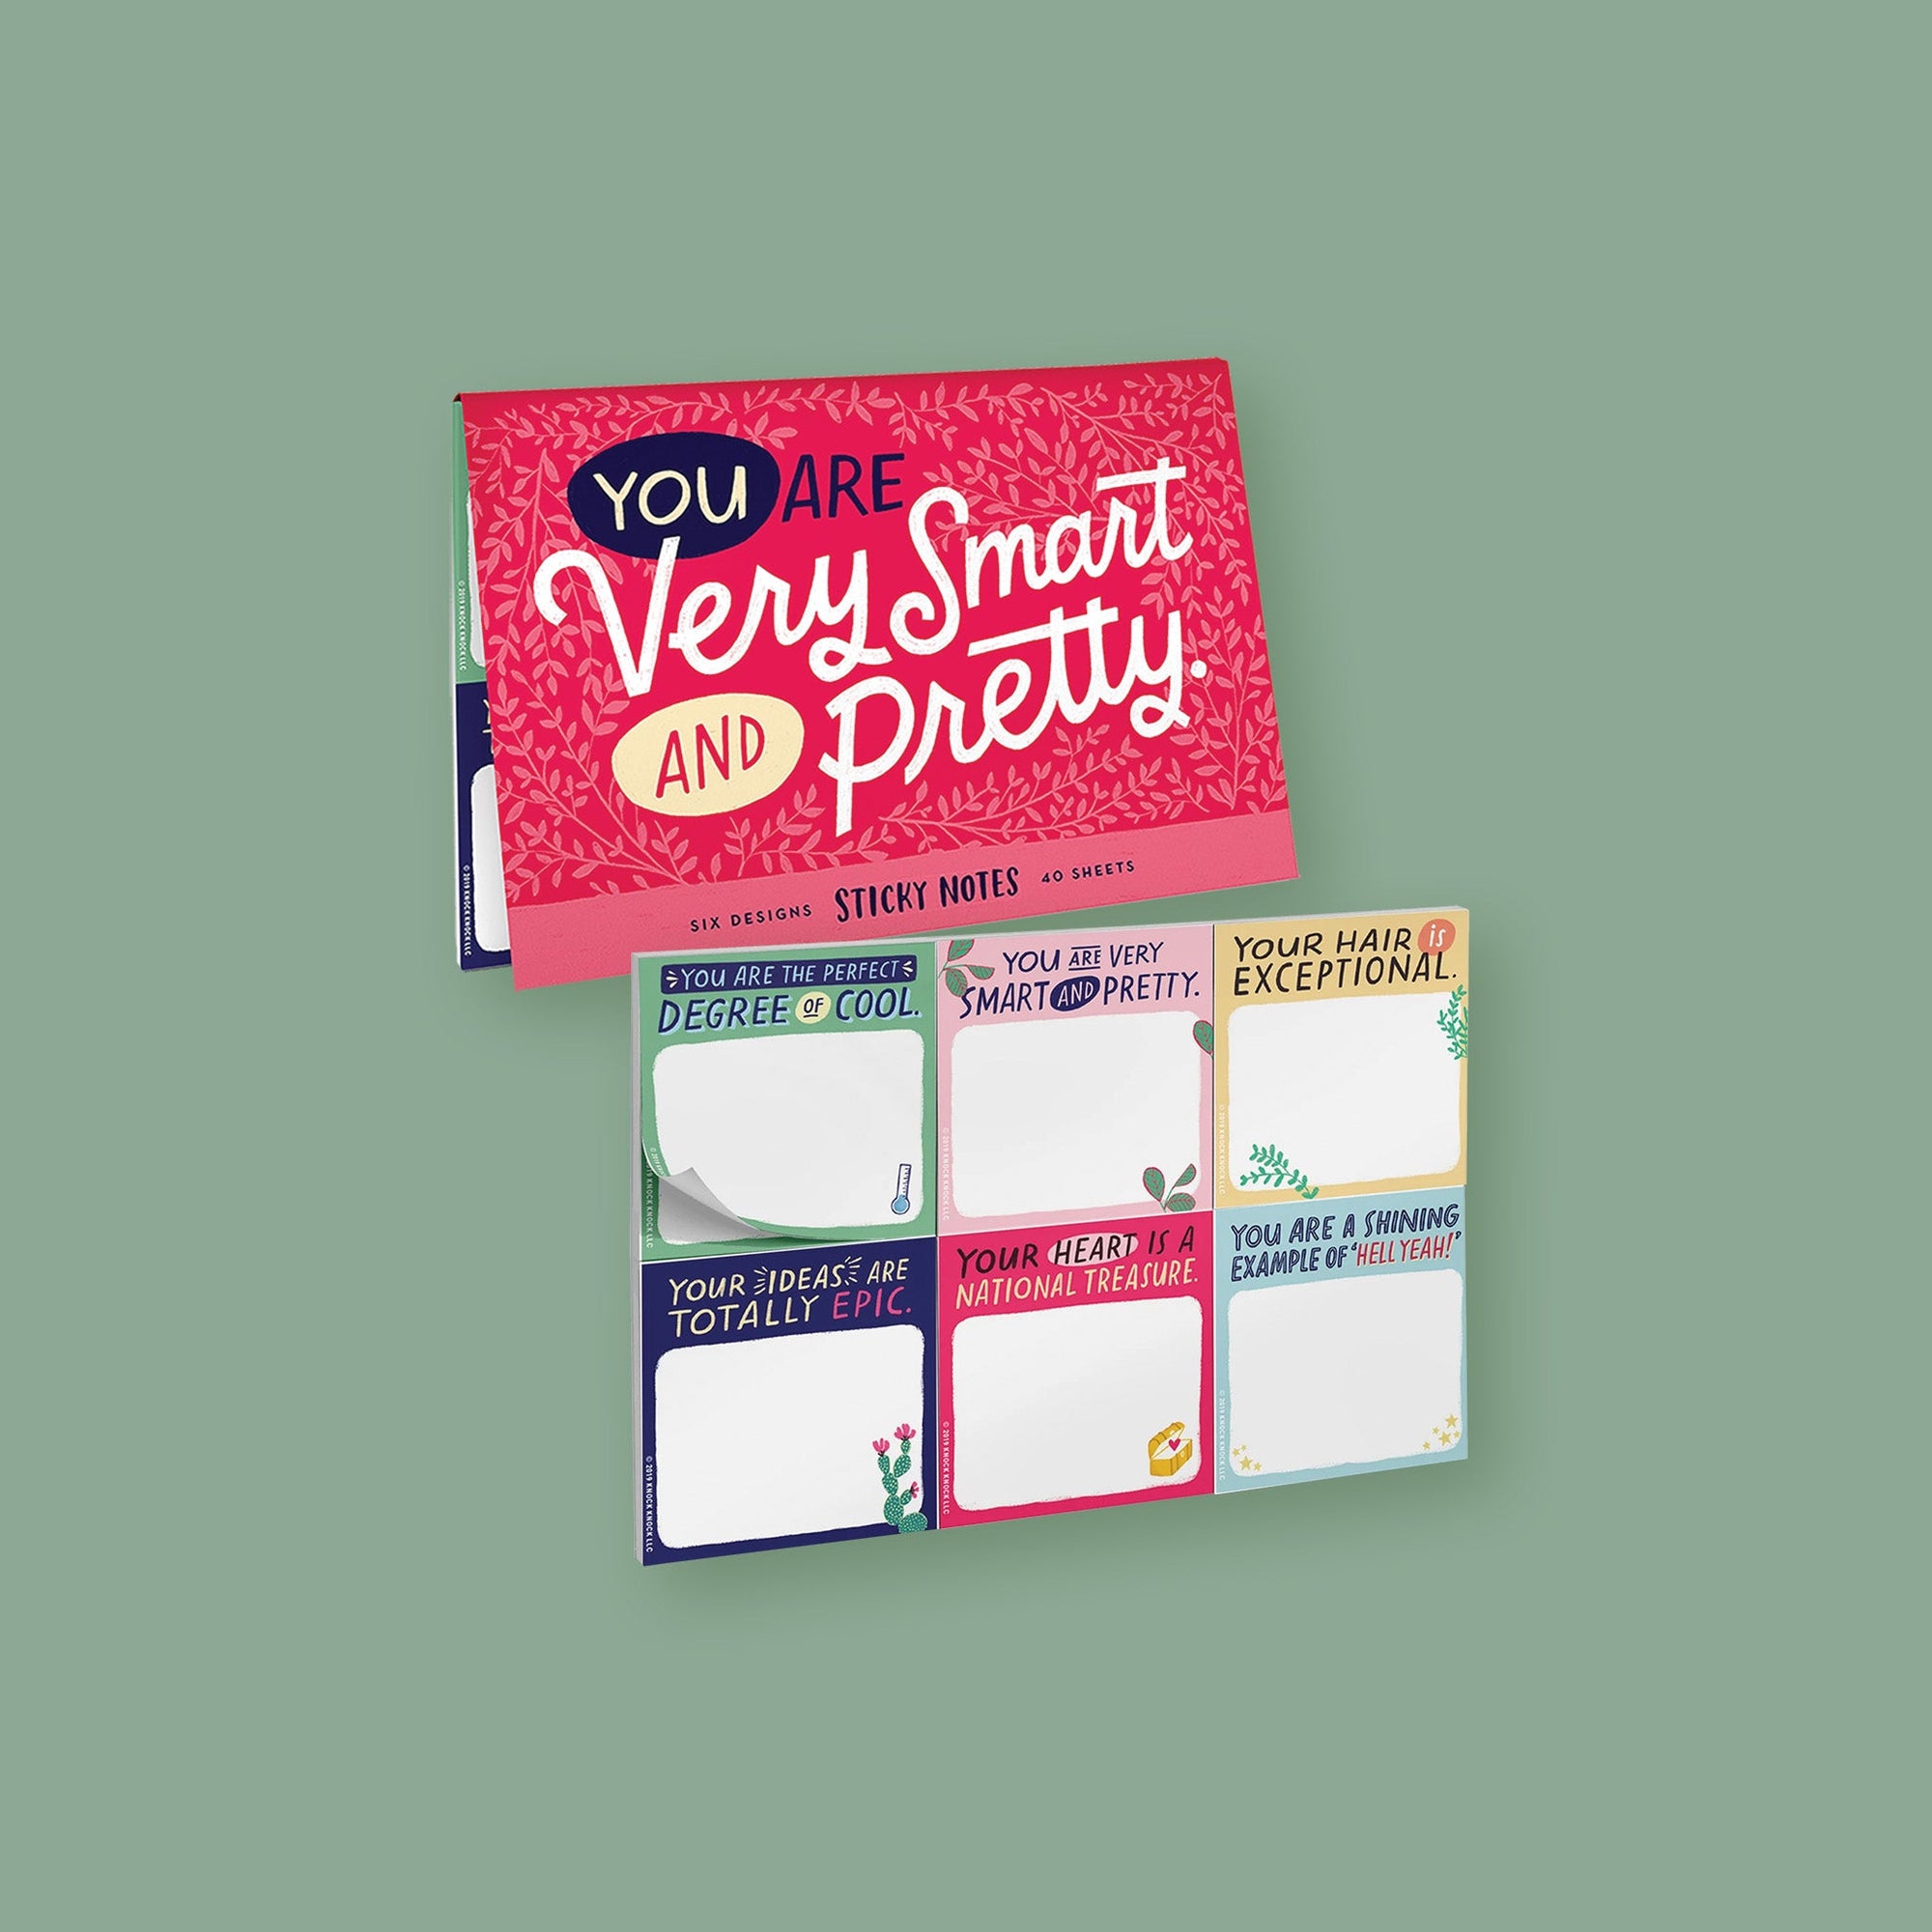 On a moss green background sits a packet. This is a close-up of a cherry pink packet of sticky notes that has light pink illustrations of branches with leaves. It says "YOU ARE Very Smart AND Pretty" in handwritten lettering. The colors of the lettering are navy, light yellow, and white. On the bottom it says "SIX DESIGNS STICKY NOTES 40 SHEETS" in navy, handwritten lettering. Under the packet shows six colorful, sticky note designs with various positive sayings at the top of each.